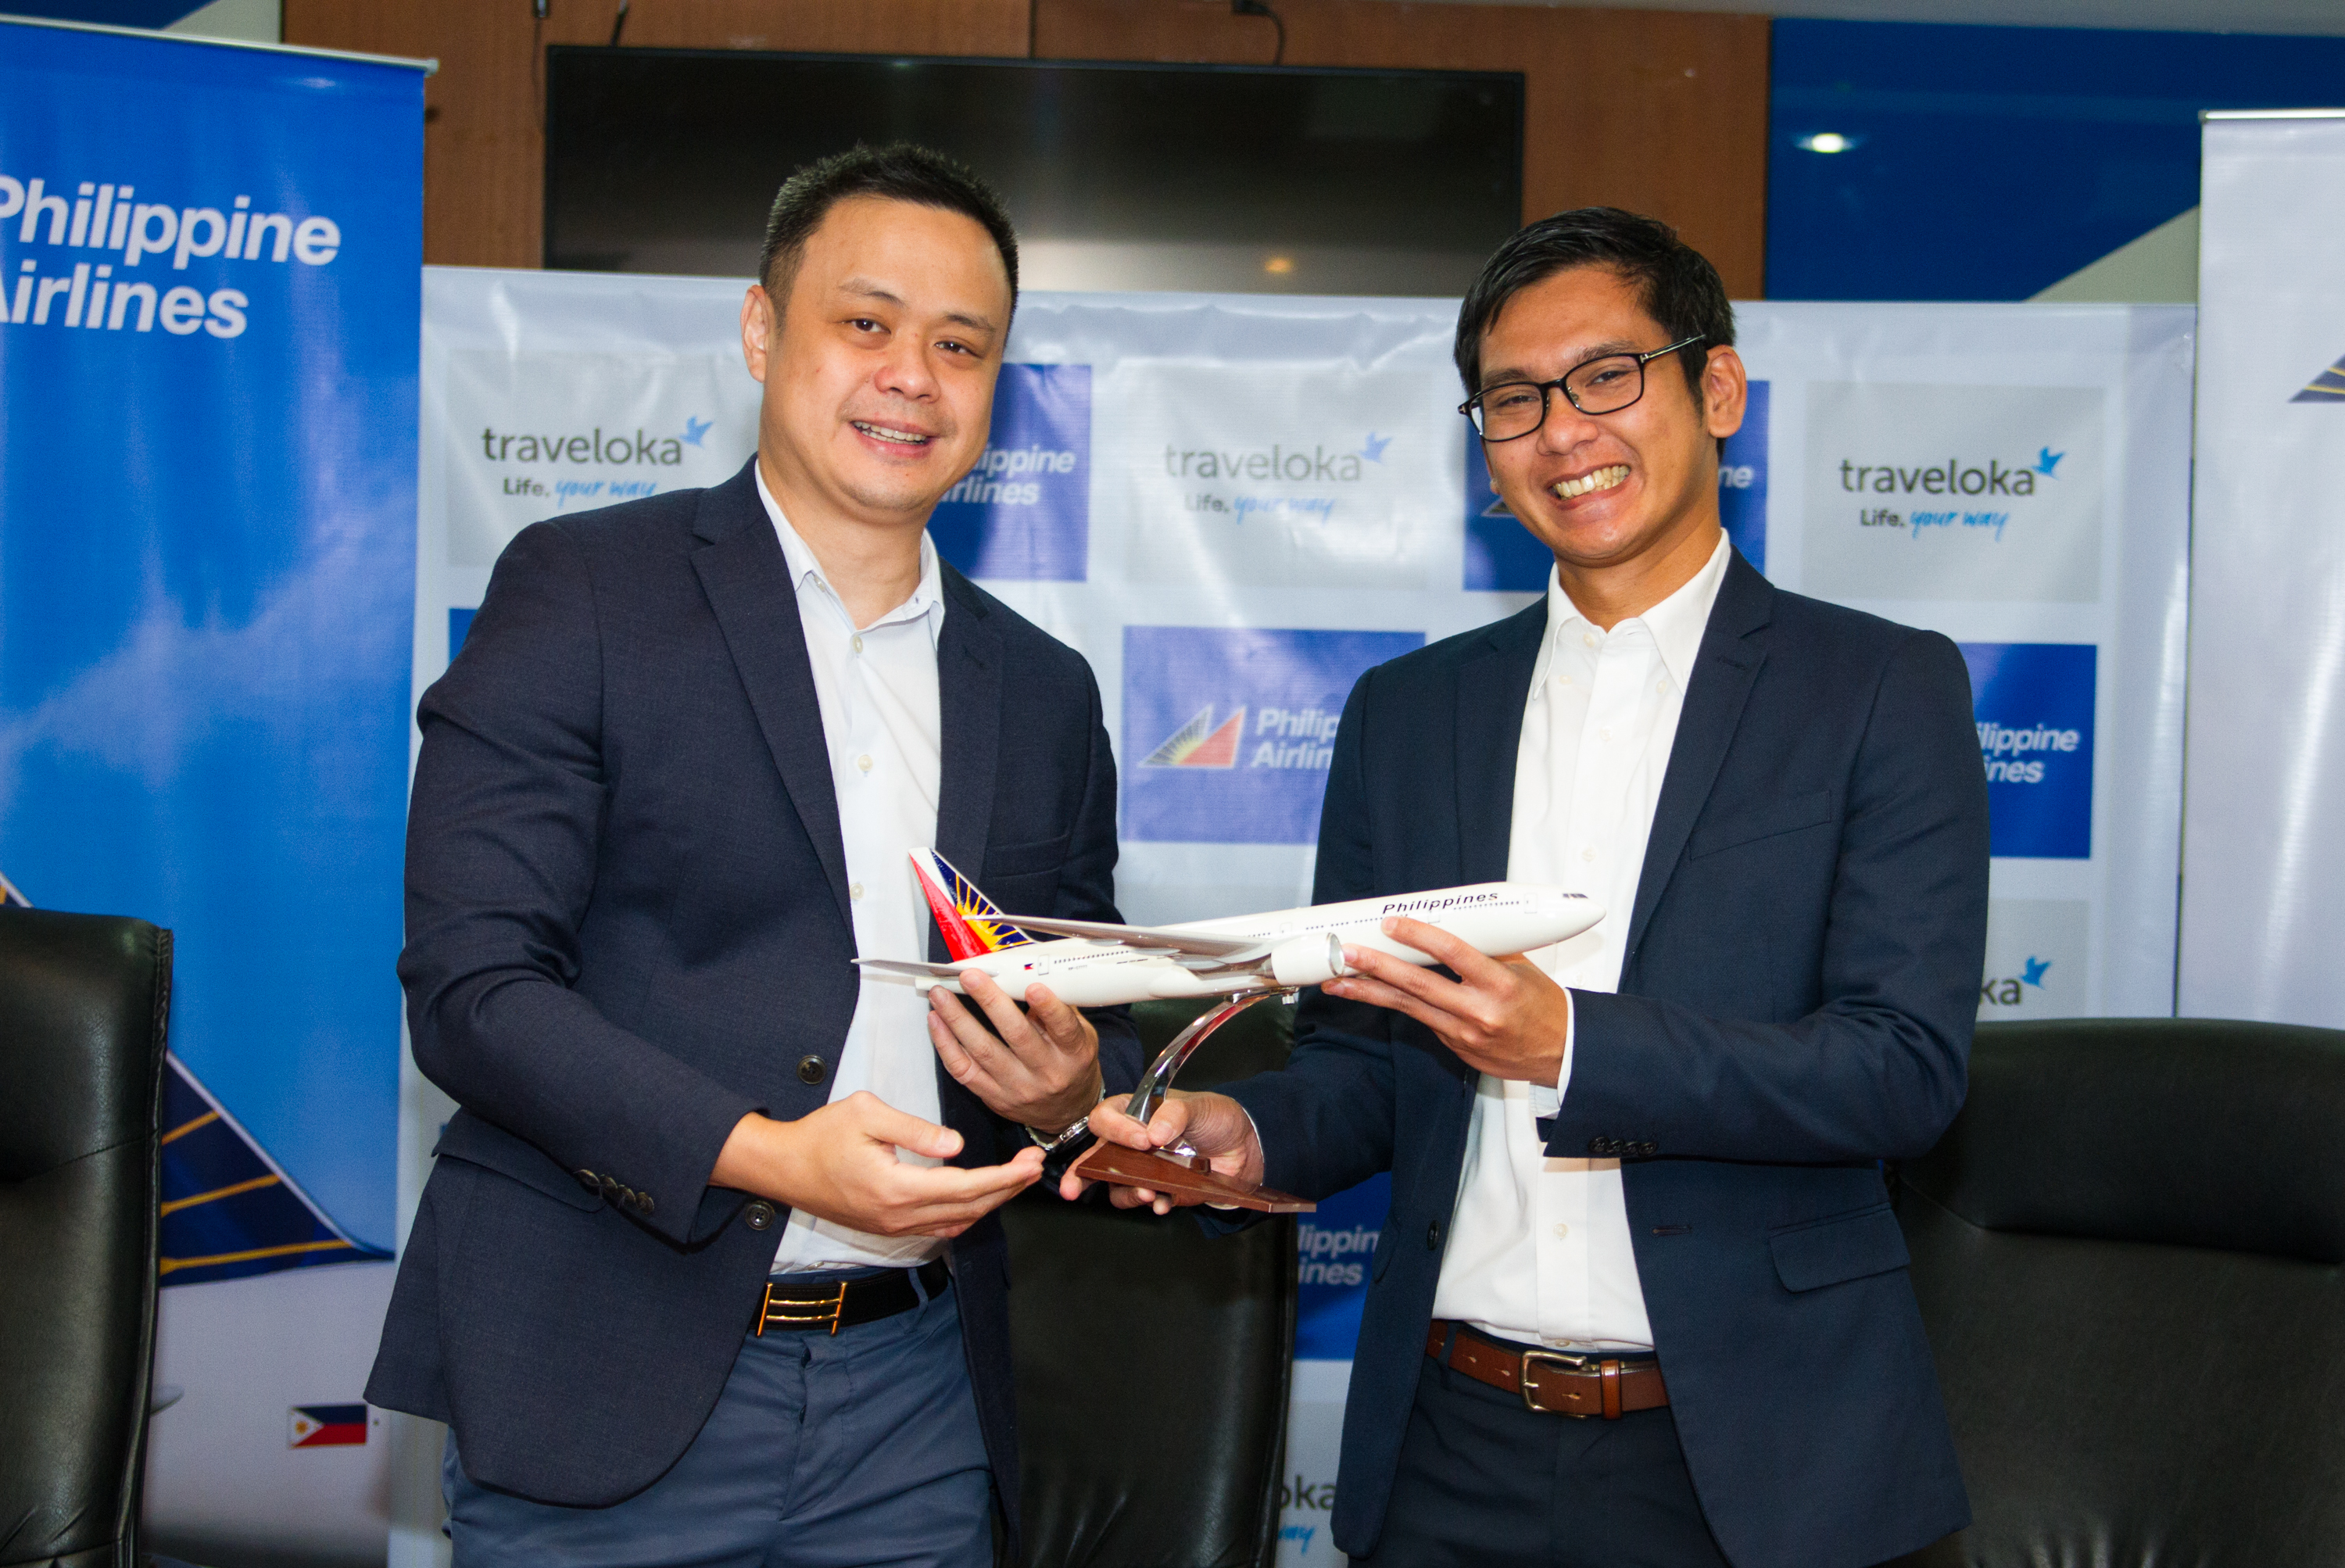 (L-R) Captain Stanley K. Ng, President & COO of Philippine Airlines and Iko Putera, CEO of Transport, Traveloka